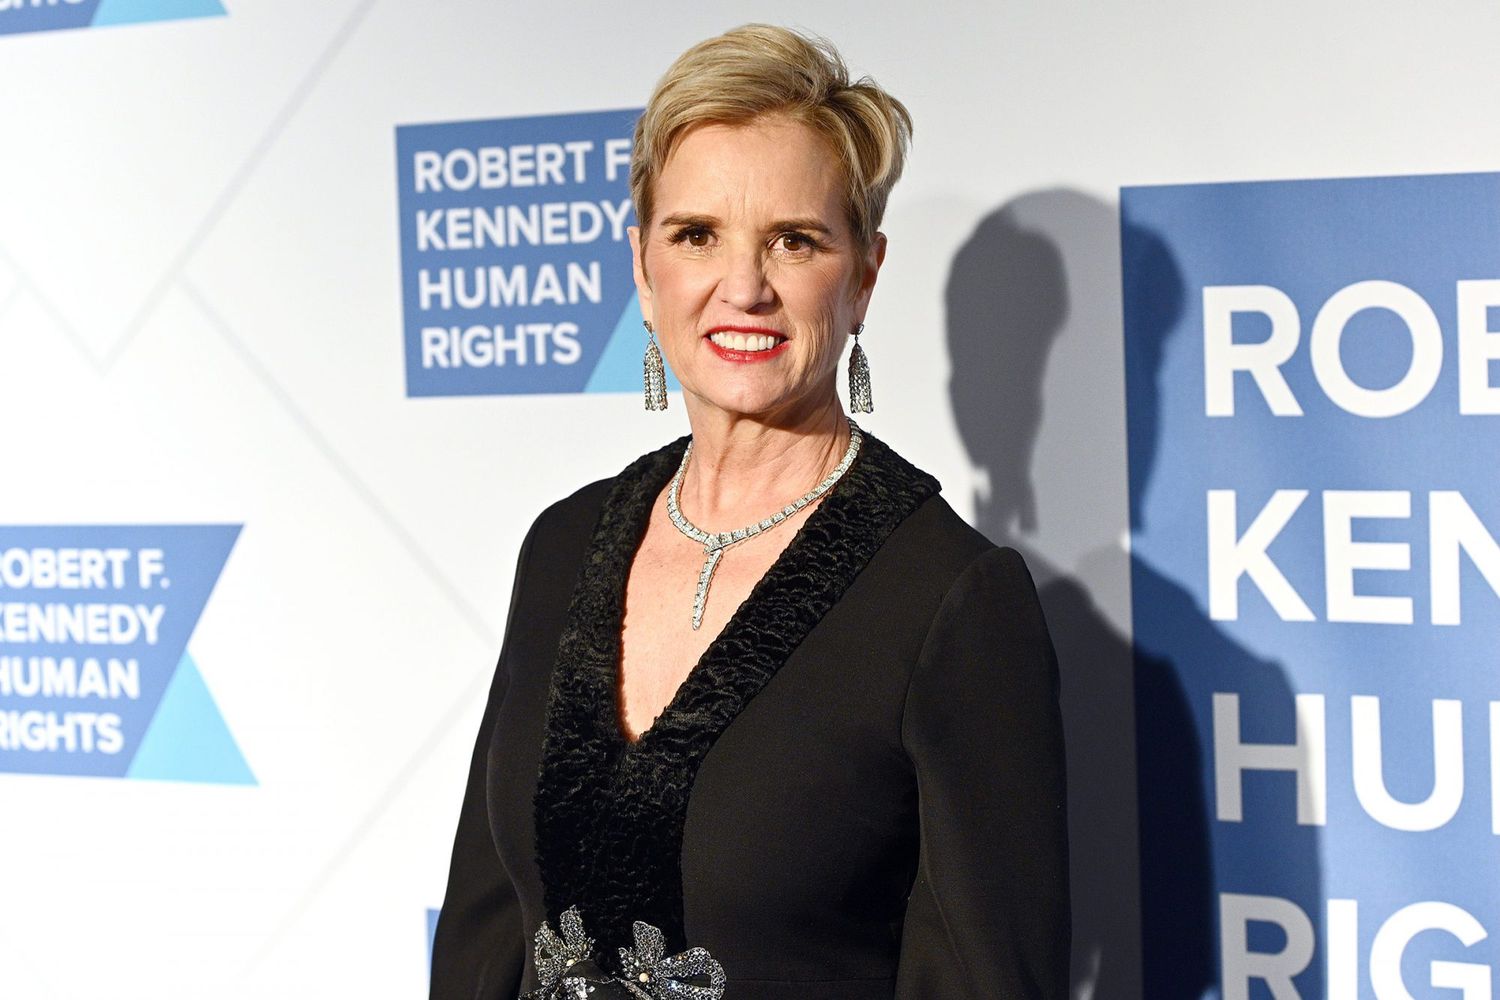 12-intriguing-facts-about-kerry-kennedy